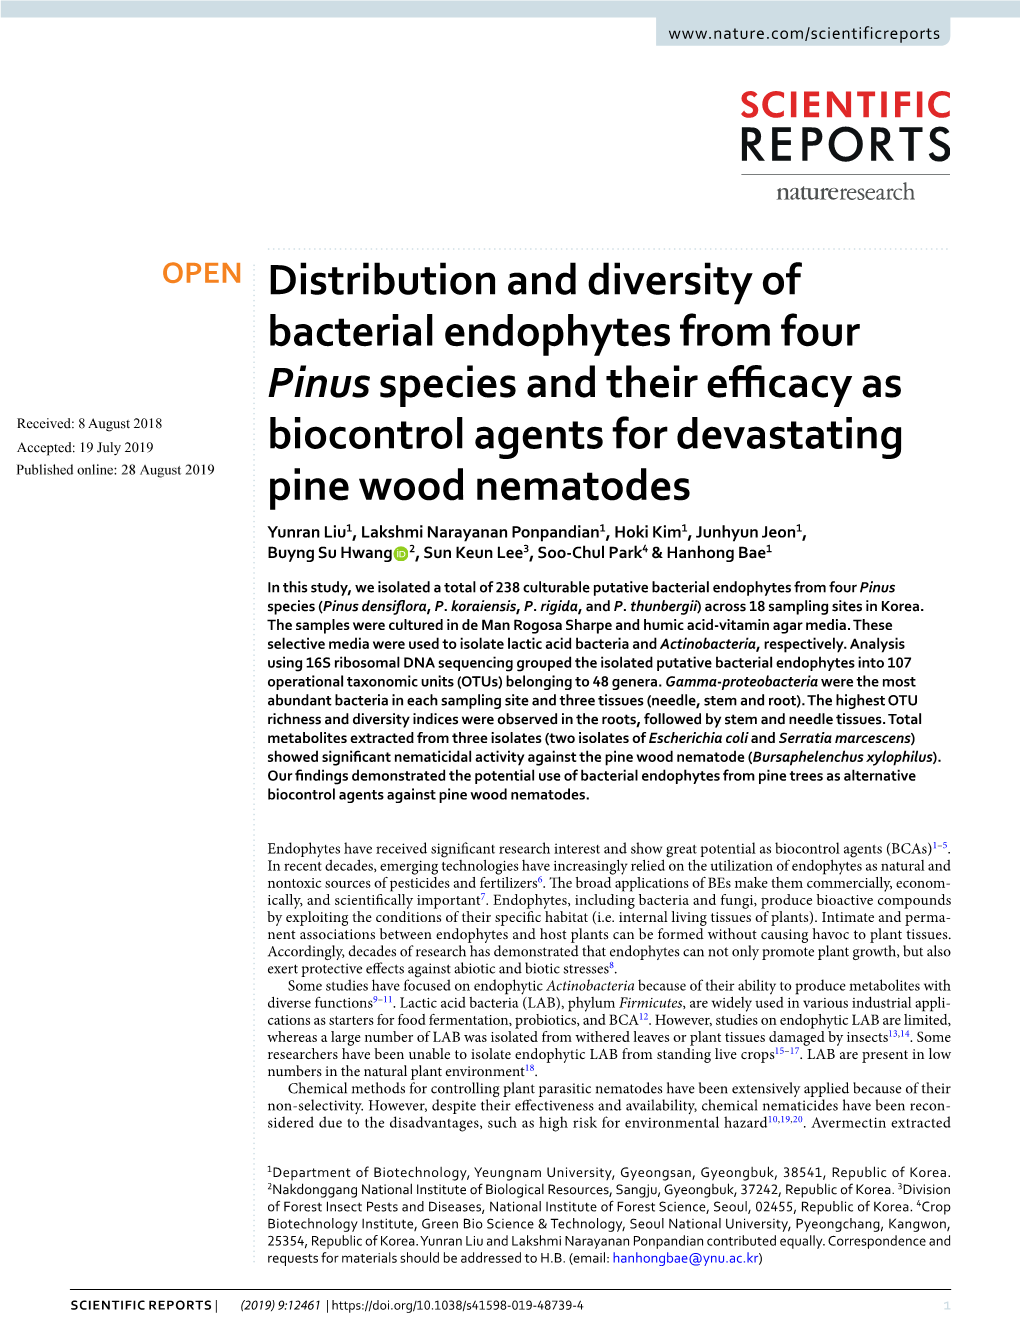 Distribution and Diversity of Bacterial Endophytes from Four Pinus Species